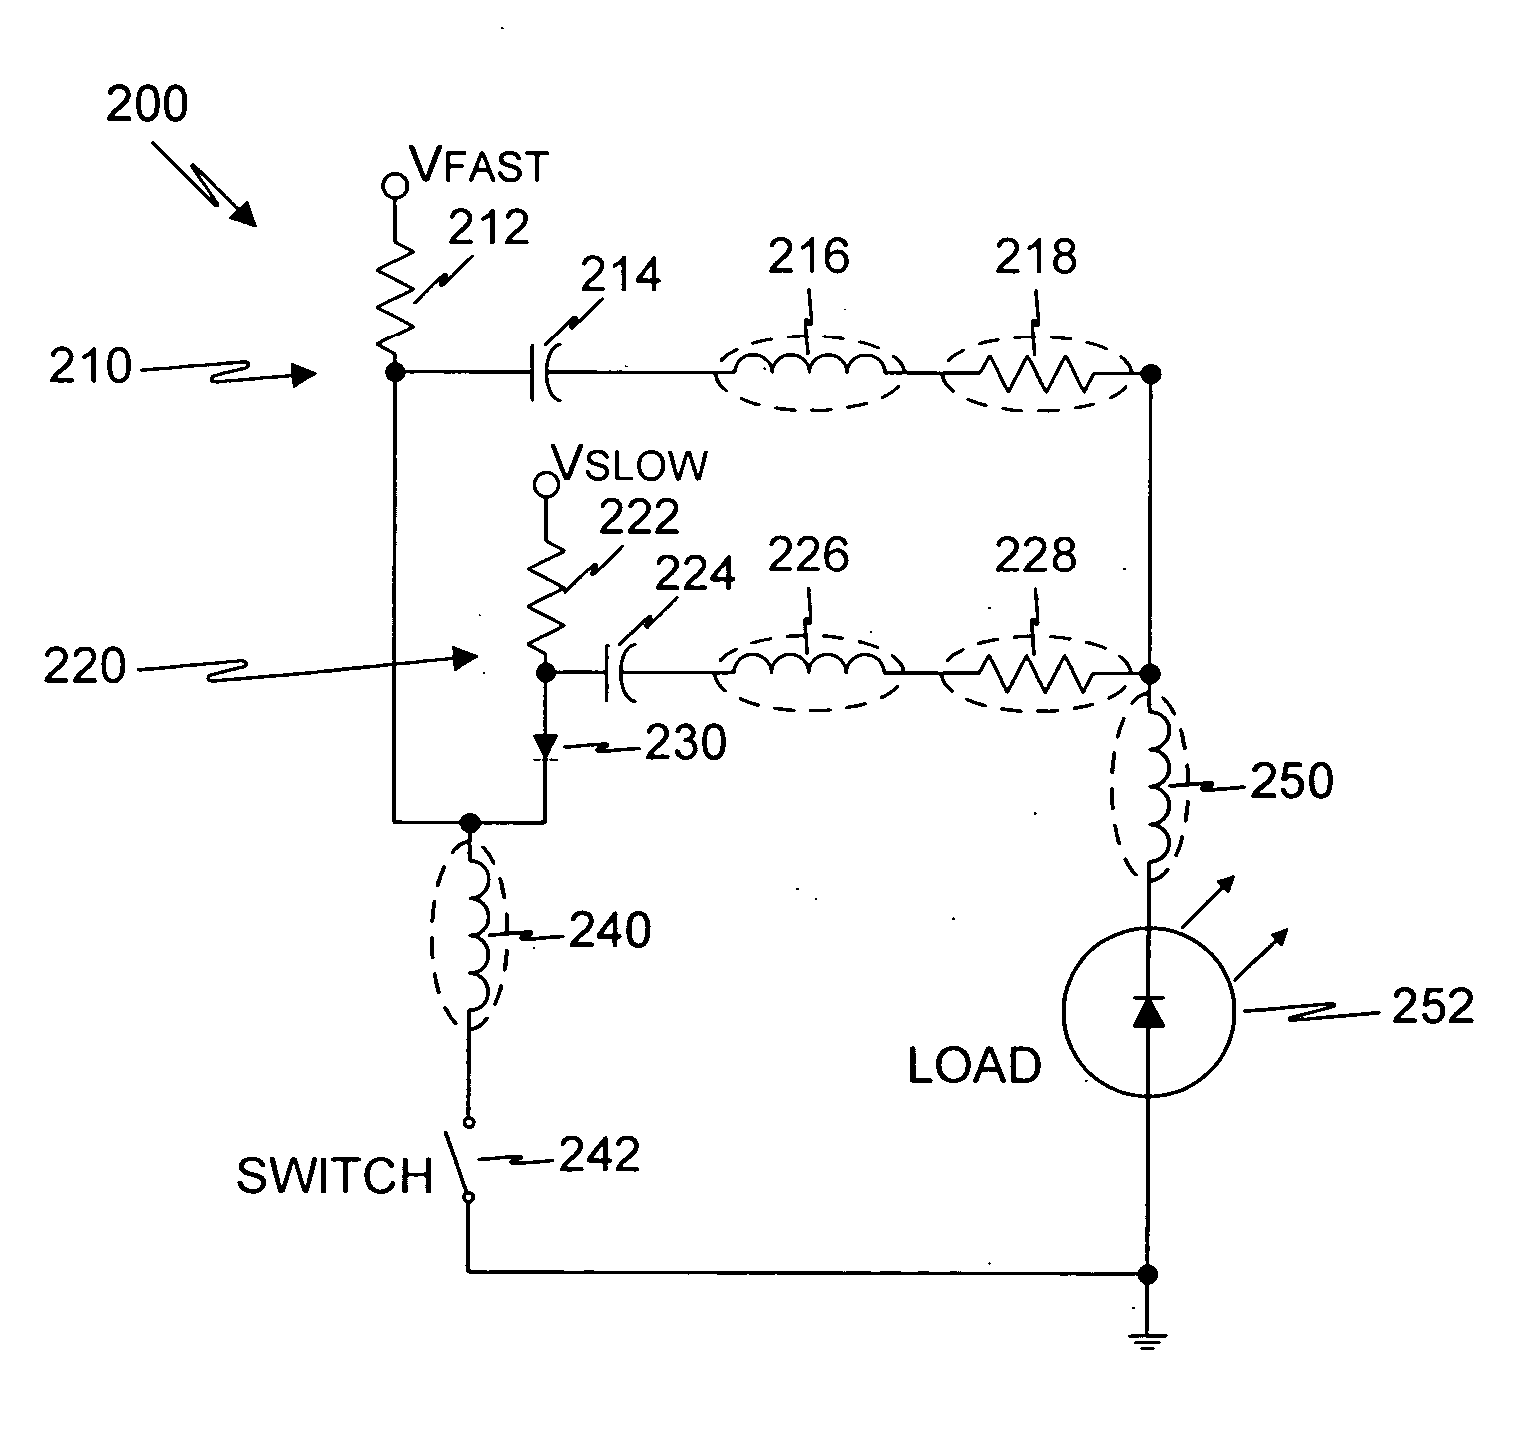 Apparatus and method for driving a pulsed laser diode